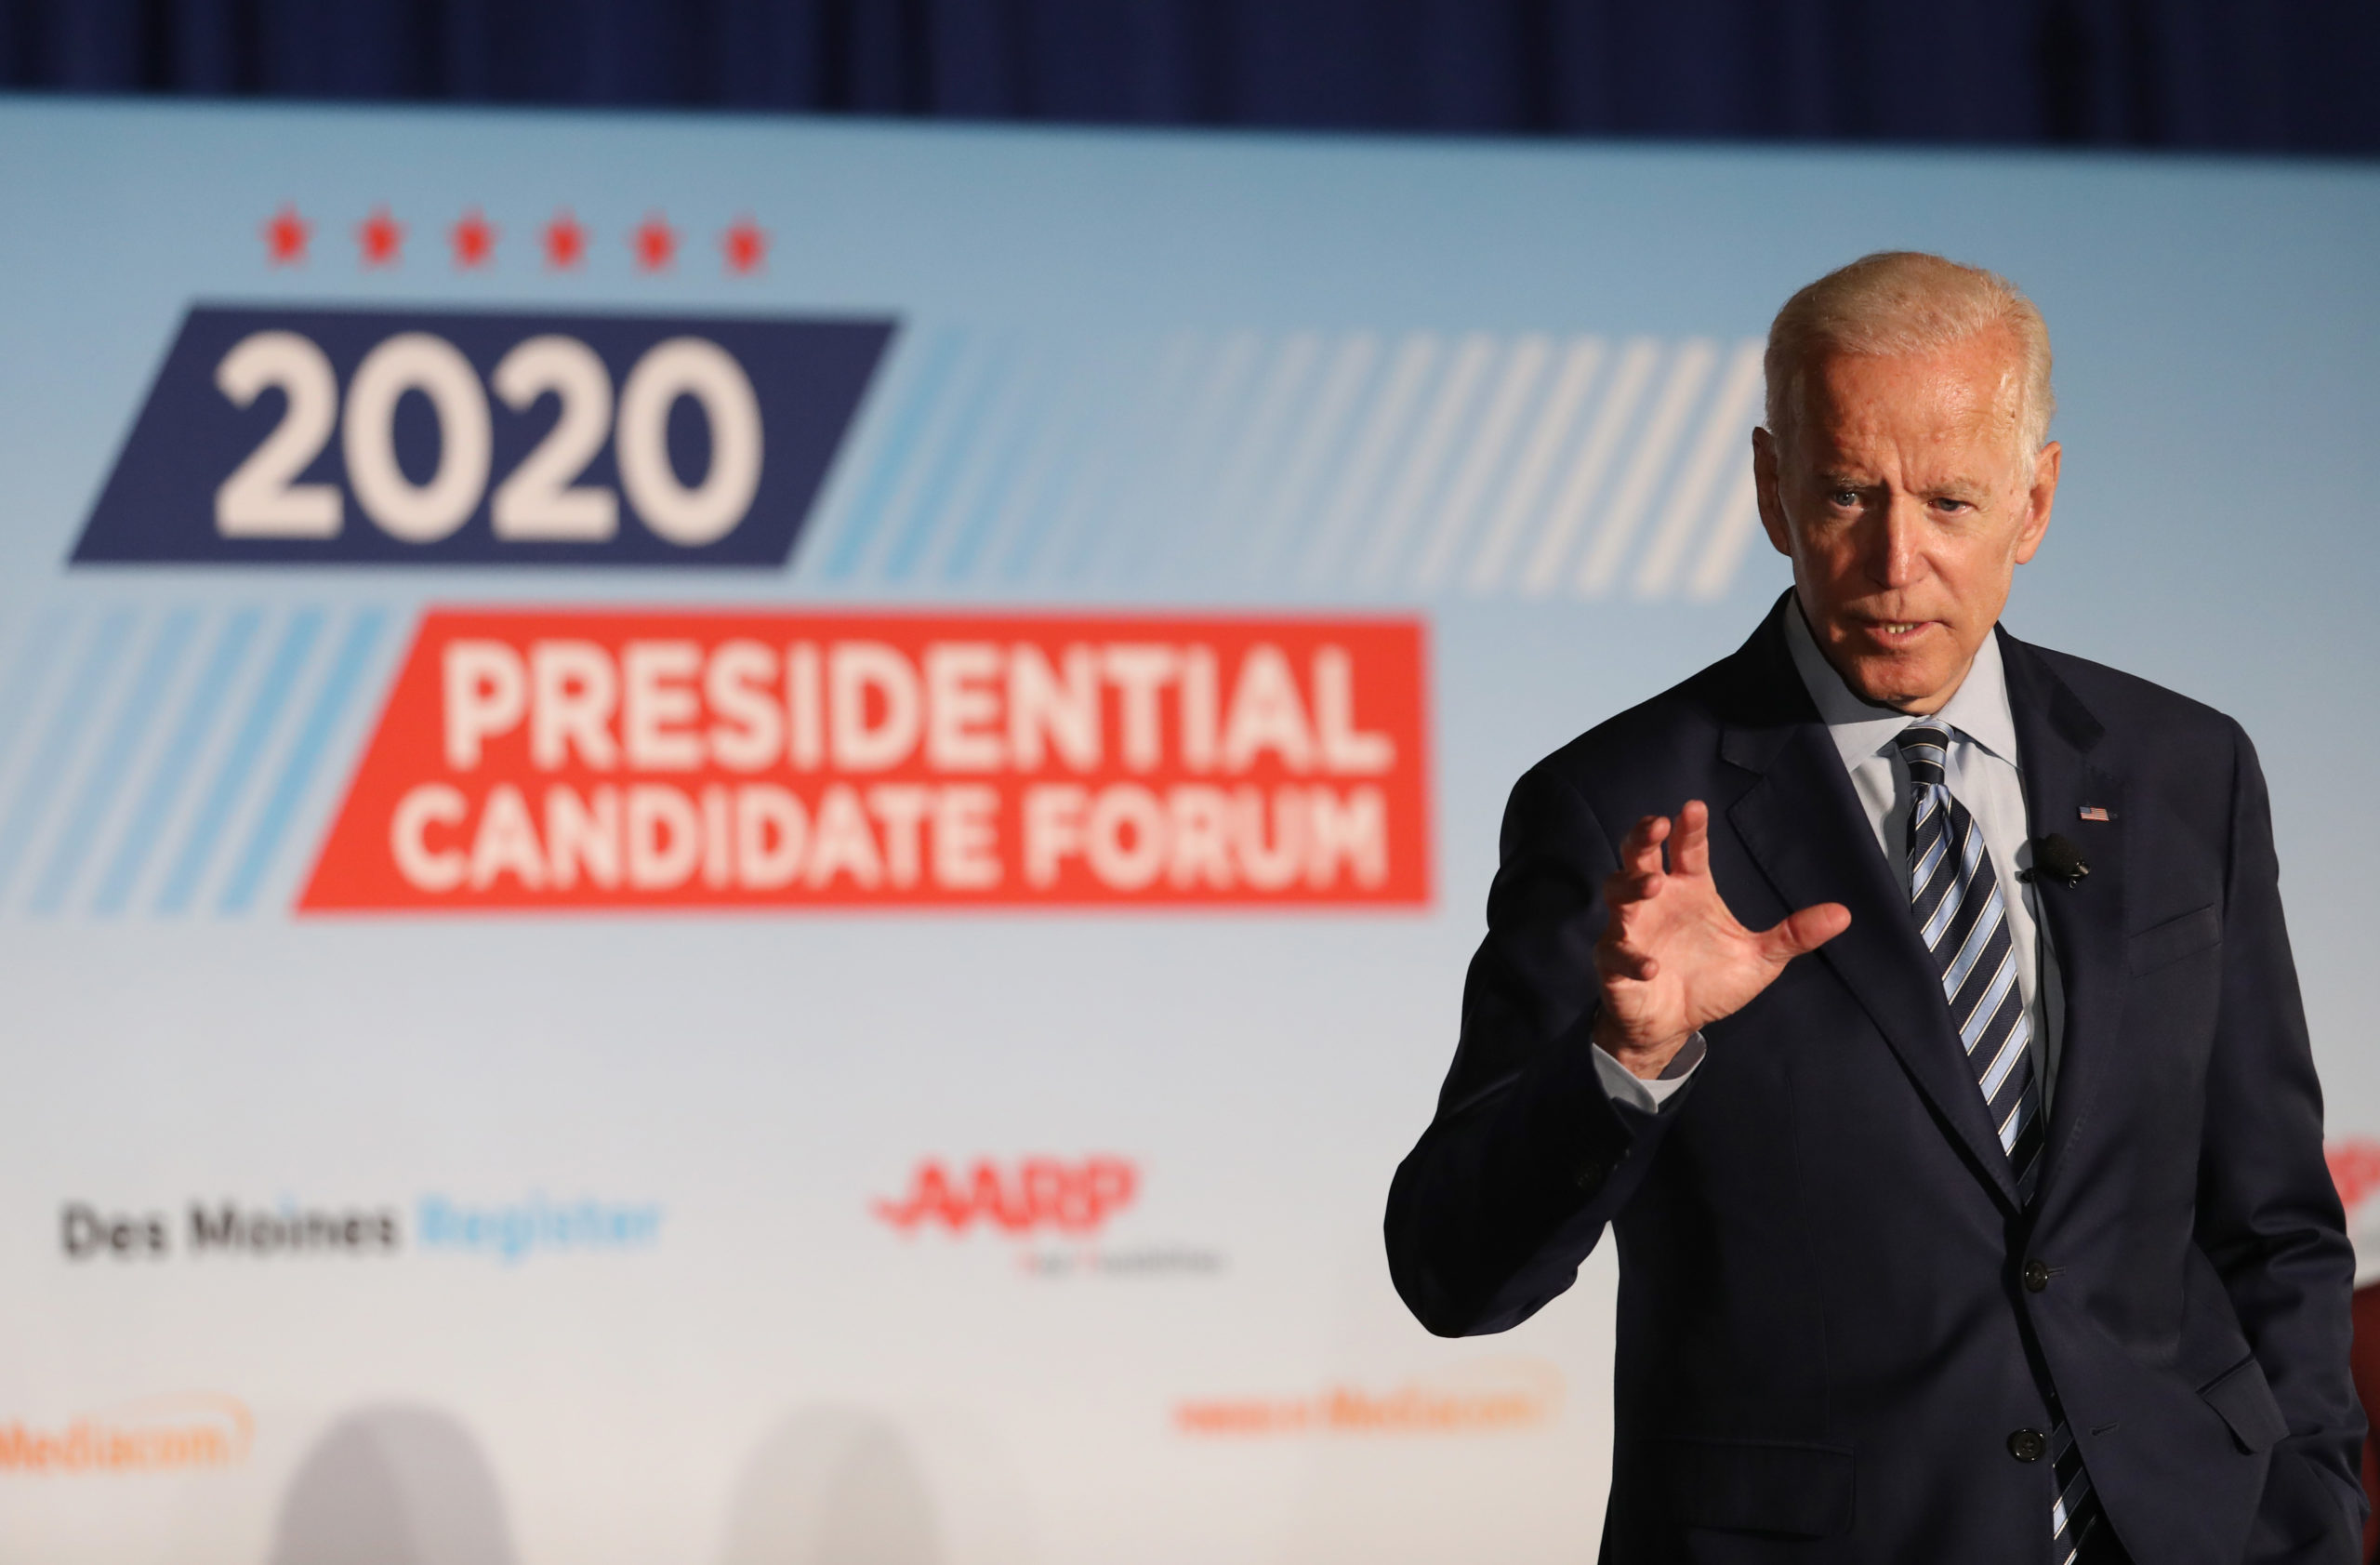 Democratic presidential candidate former U.S. Vice President Joe Biden speaks during the AARP and The Des Moines Register Iowa Presidential Candidate Forum at Drake University on July 15, 2019 in Des Moines, Iowa. (Photo by Justin Sullivan/Getty Images)